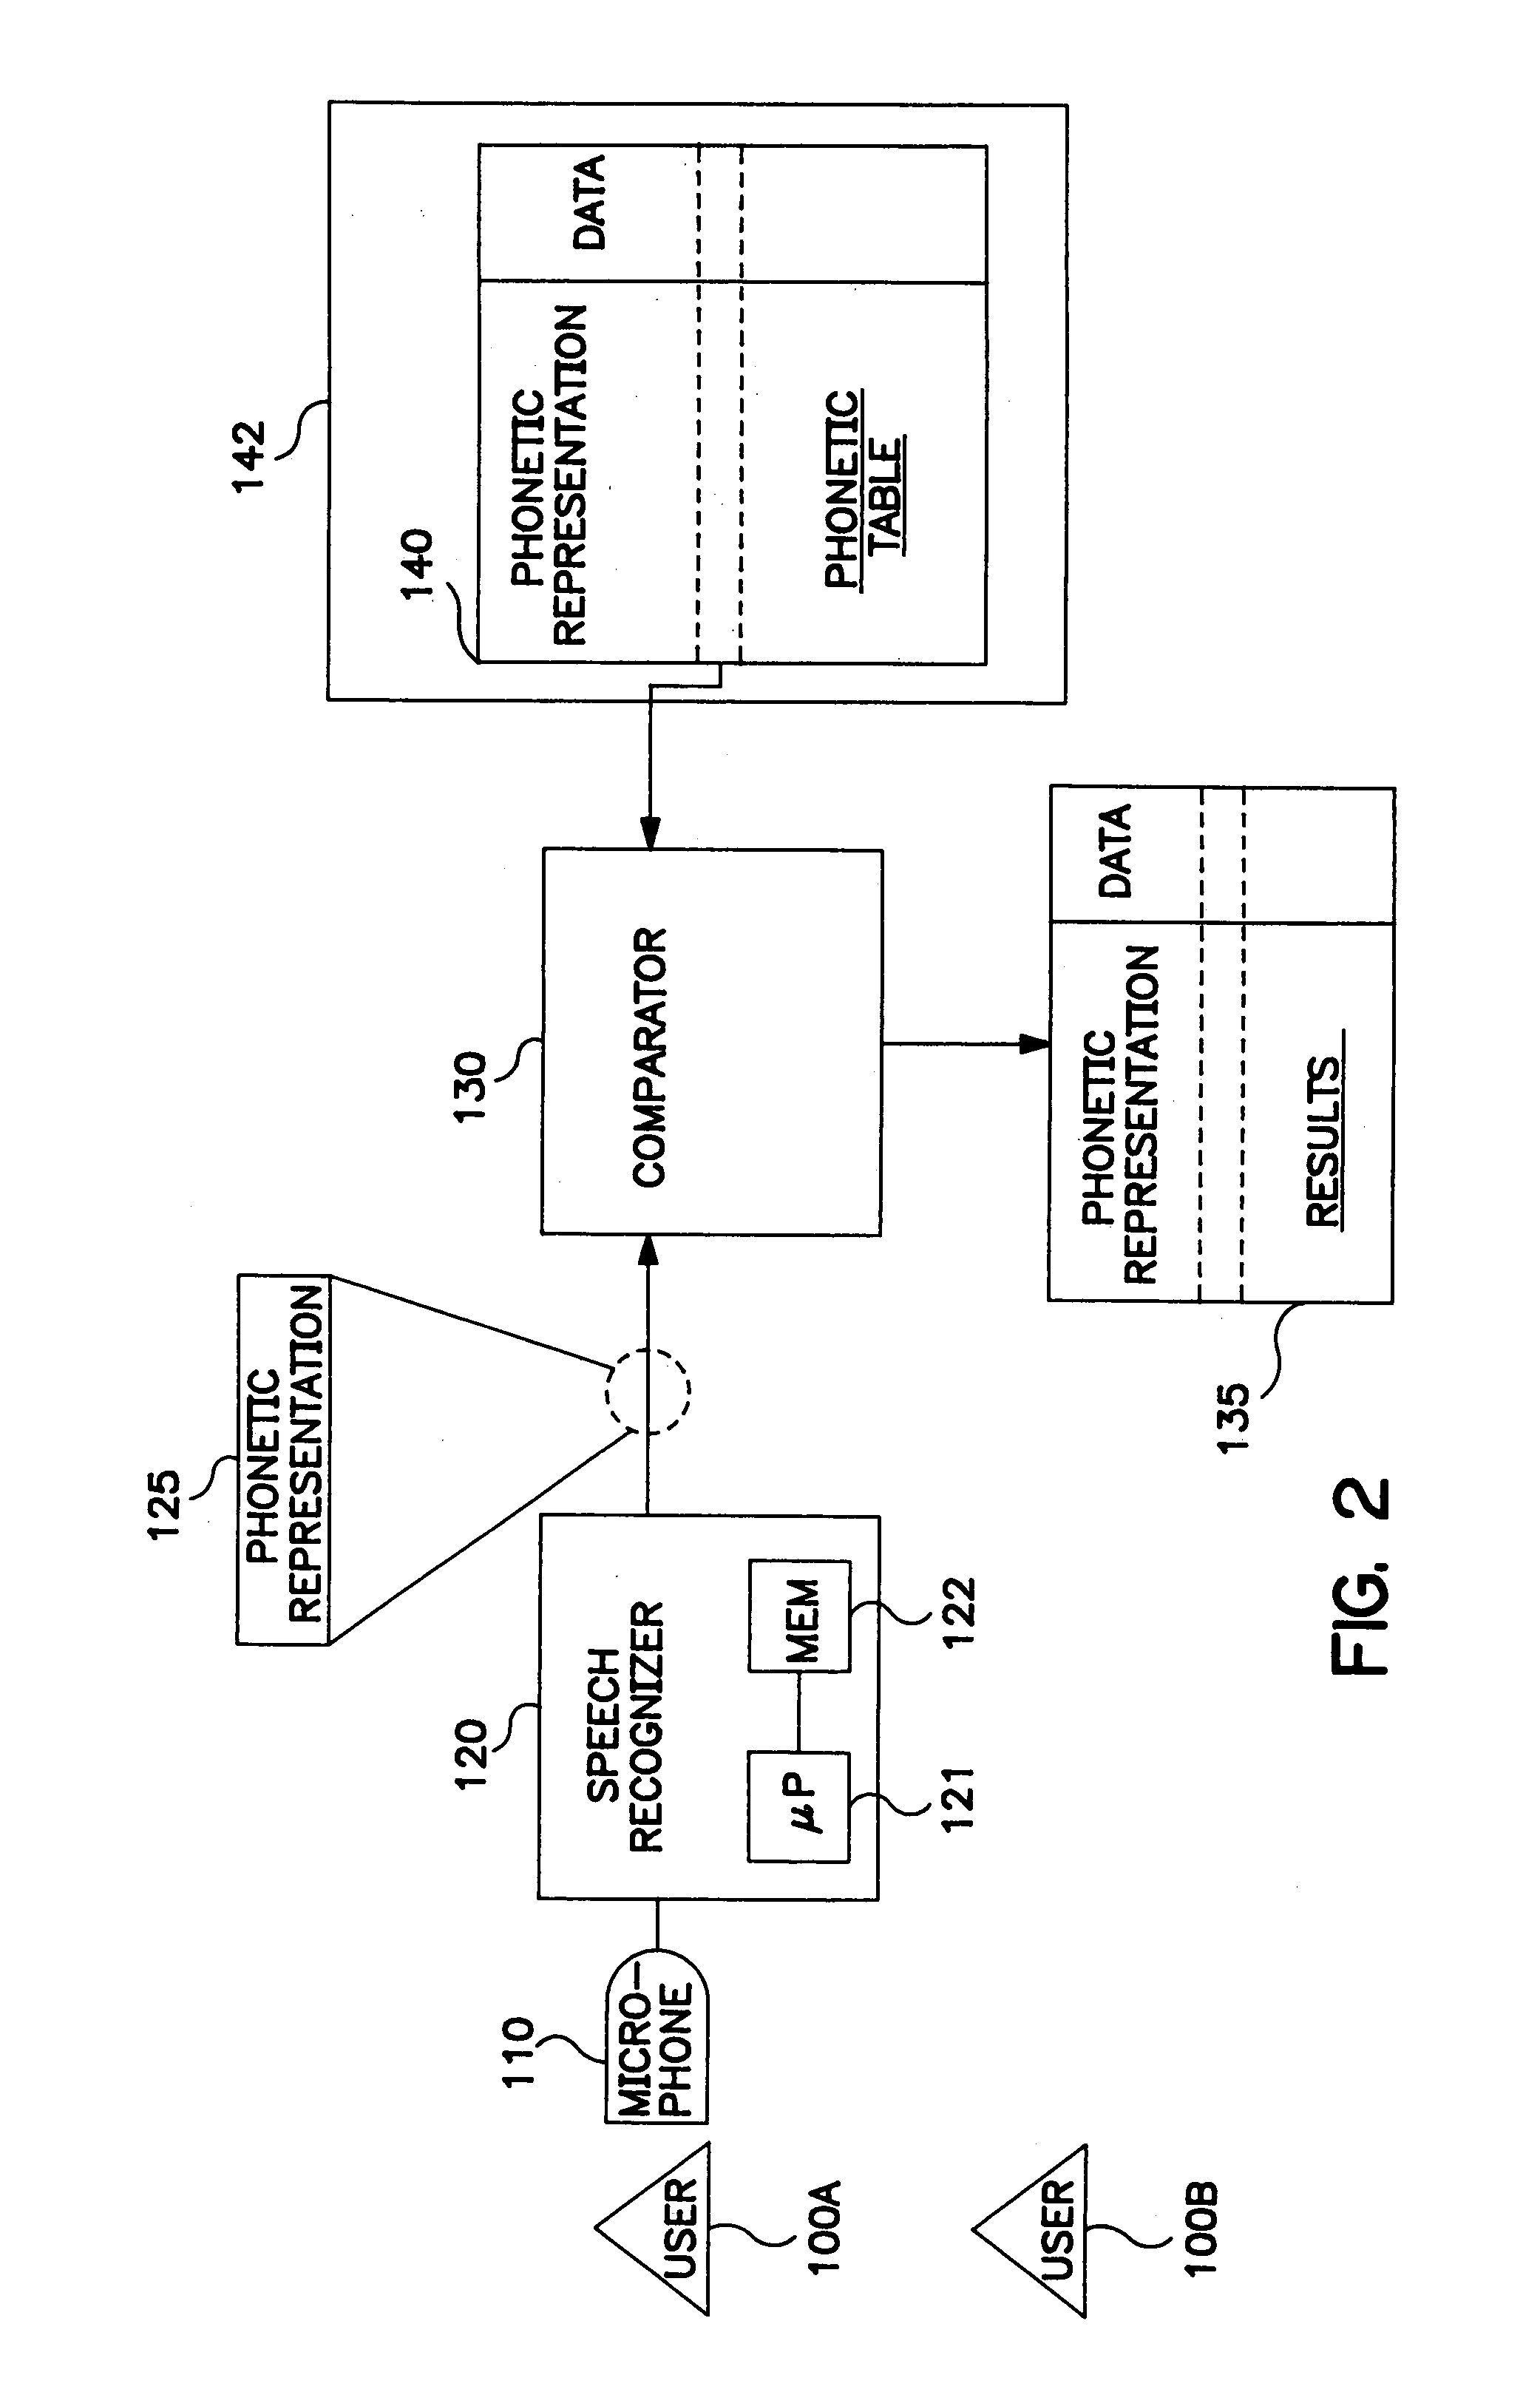 Method and apparatus for voice controlled devices with improved phrase storage, use, conversion, transfer, and recognition